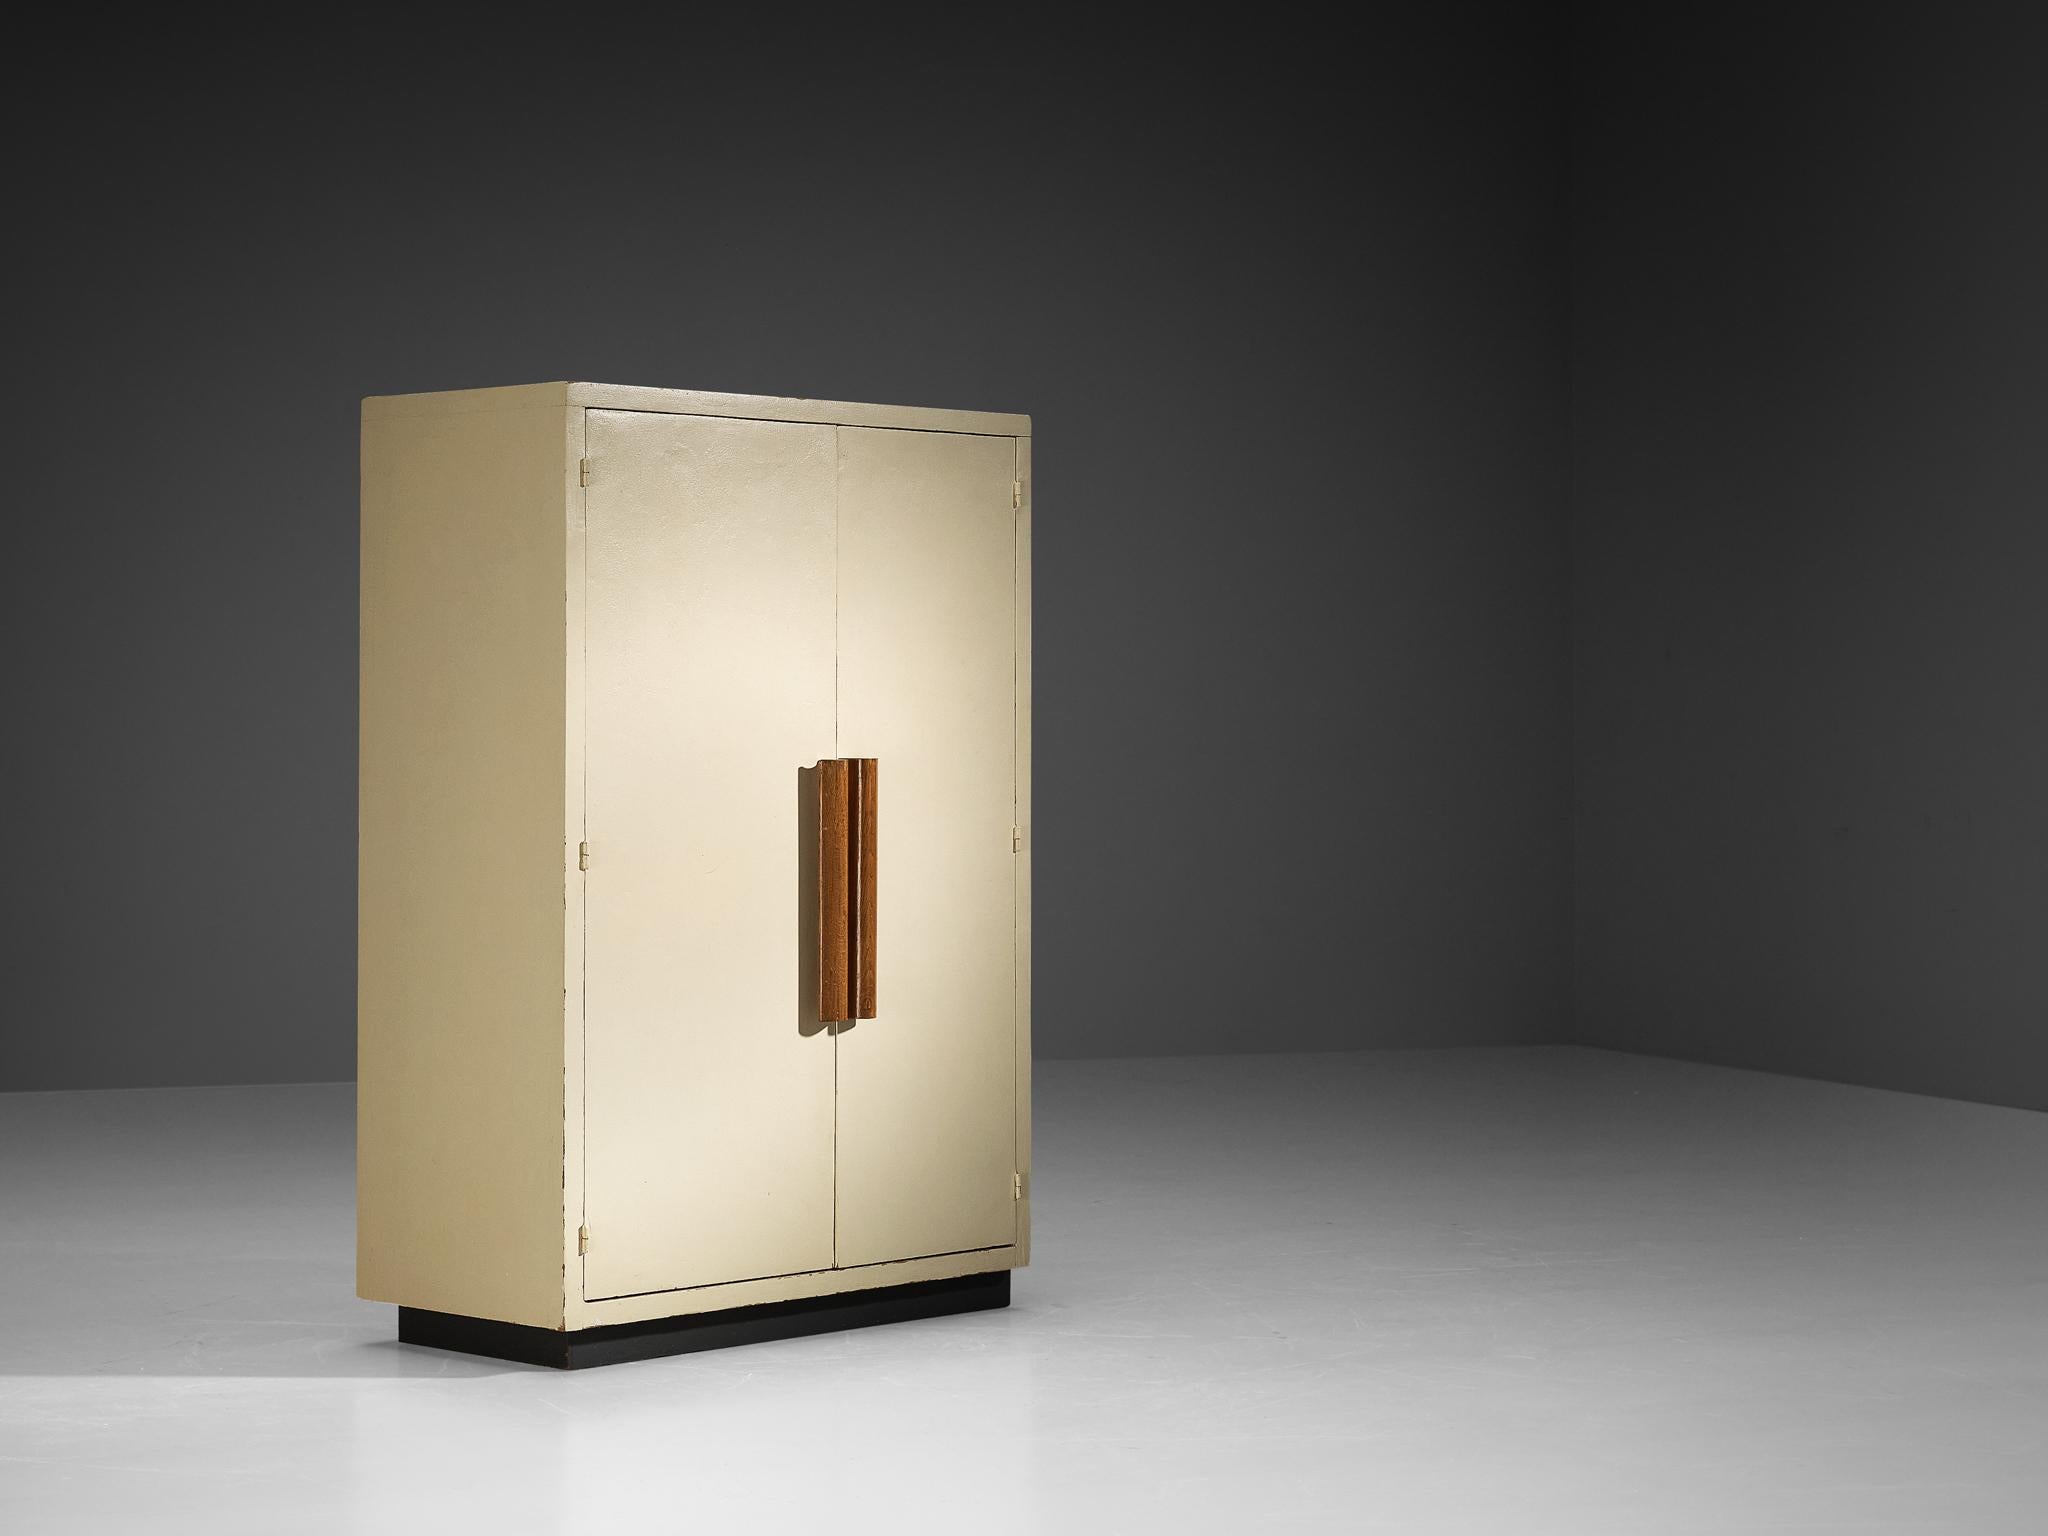 Le Corbusier and Atelier des Bâtisseurs (ATBAT) for Charles Barberis, Les Salines, Ajaccio, wardrobe, oak, lacquered wood, lacquered steel, France, 1949

The provenance of this wardrobe is notably intriguing, as it has been tailor-made for the Unité